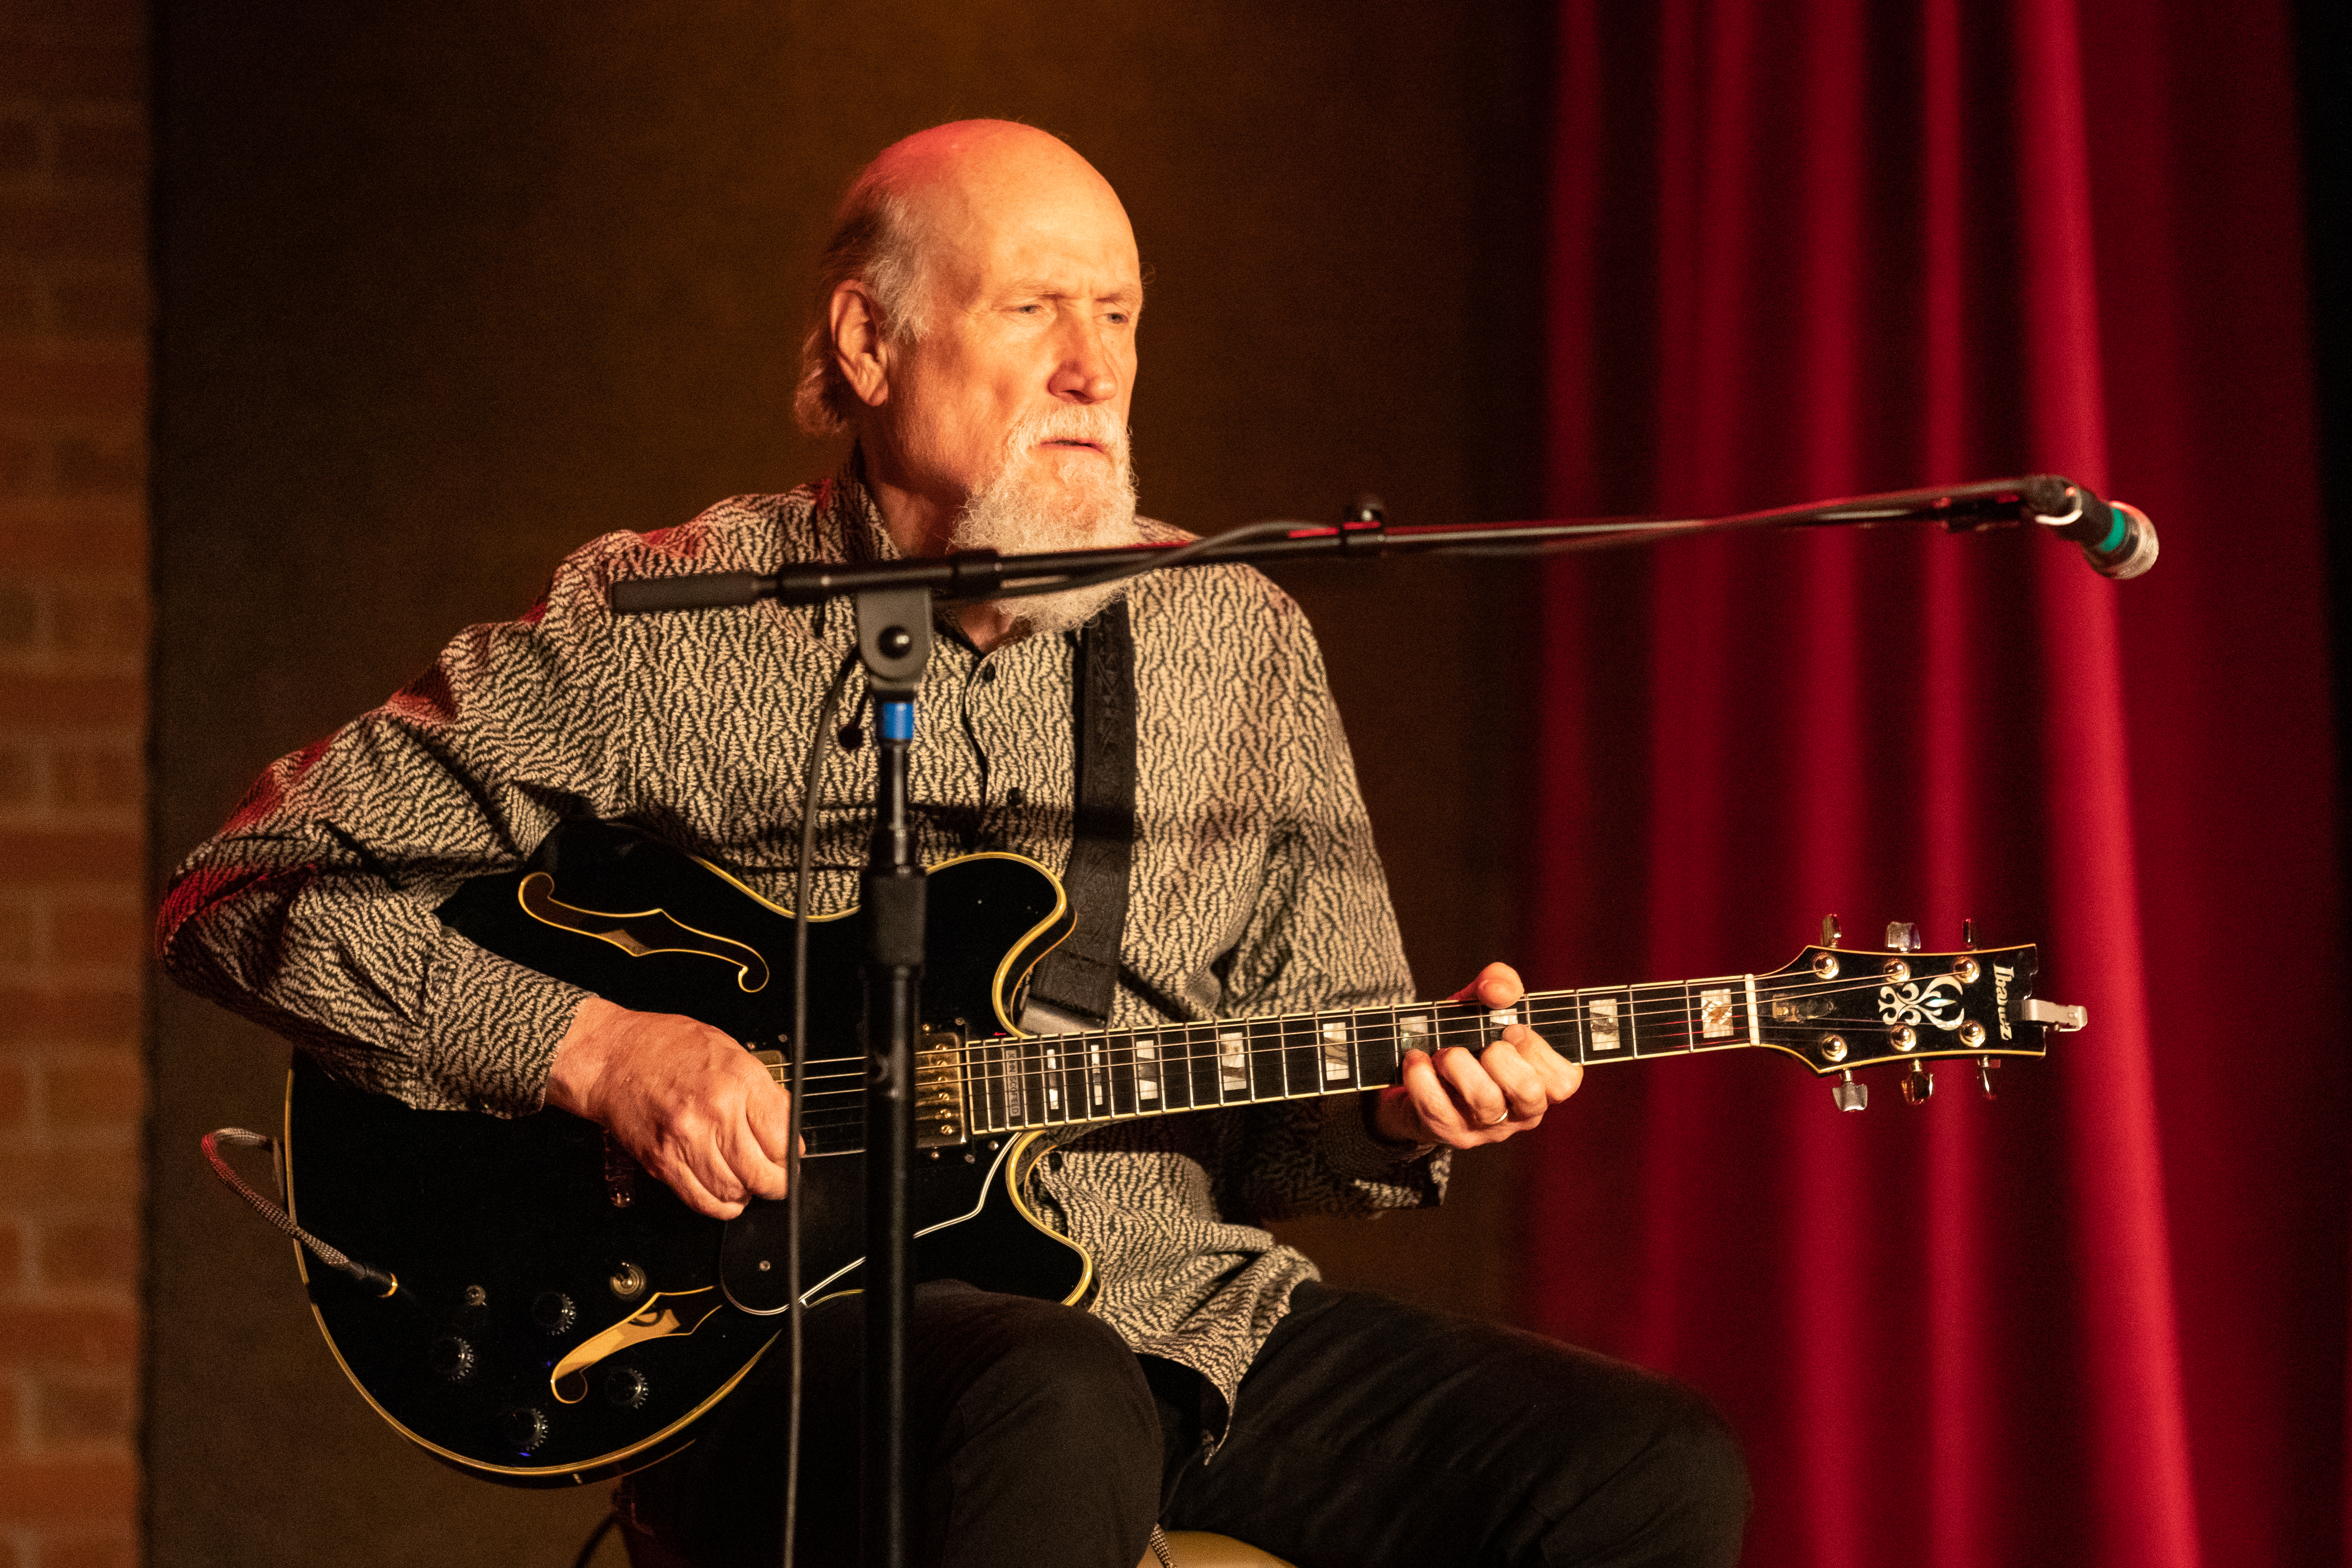 John Scofield on stage at City Winery.